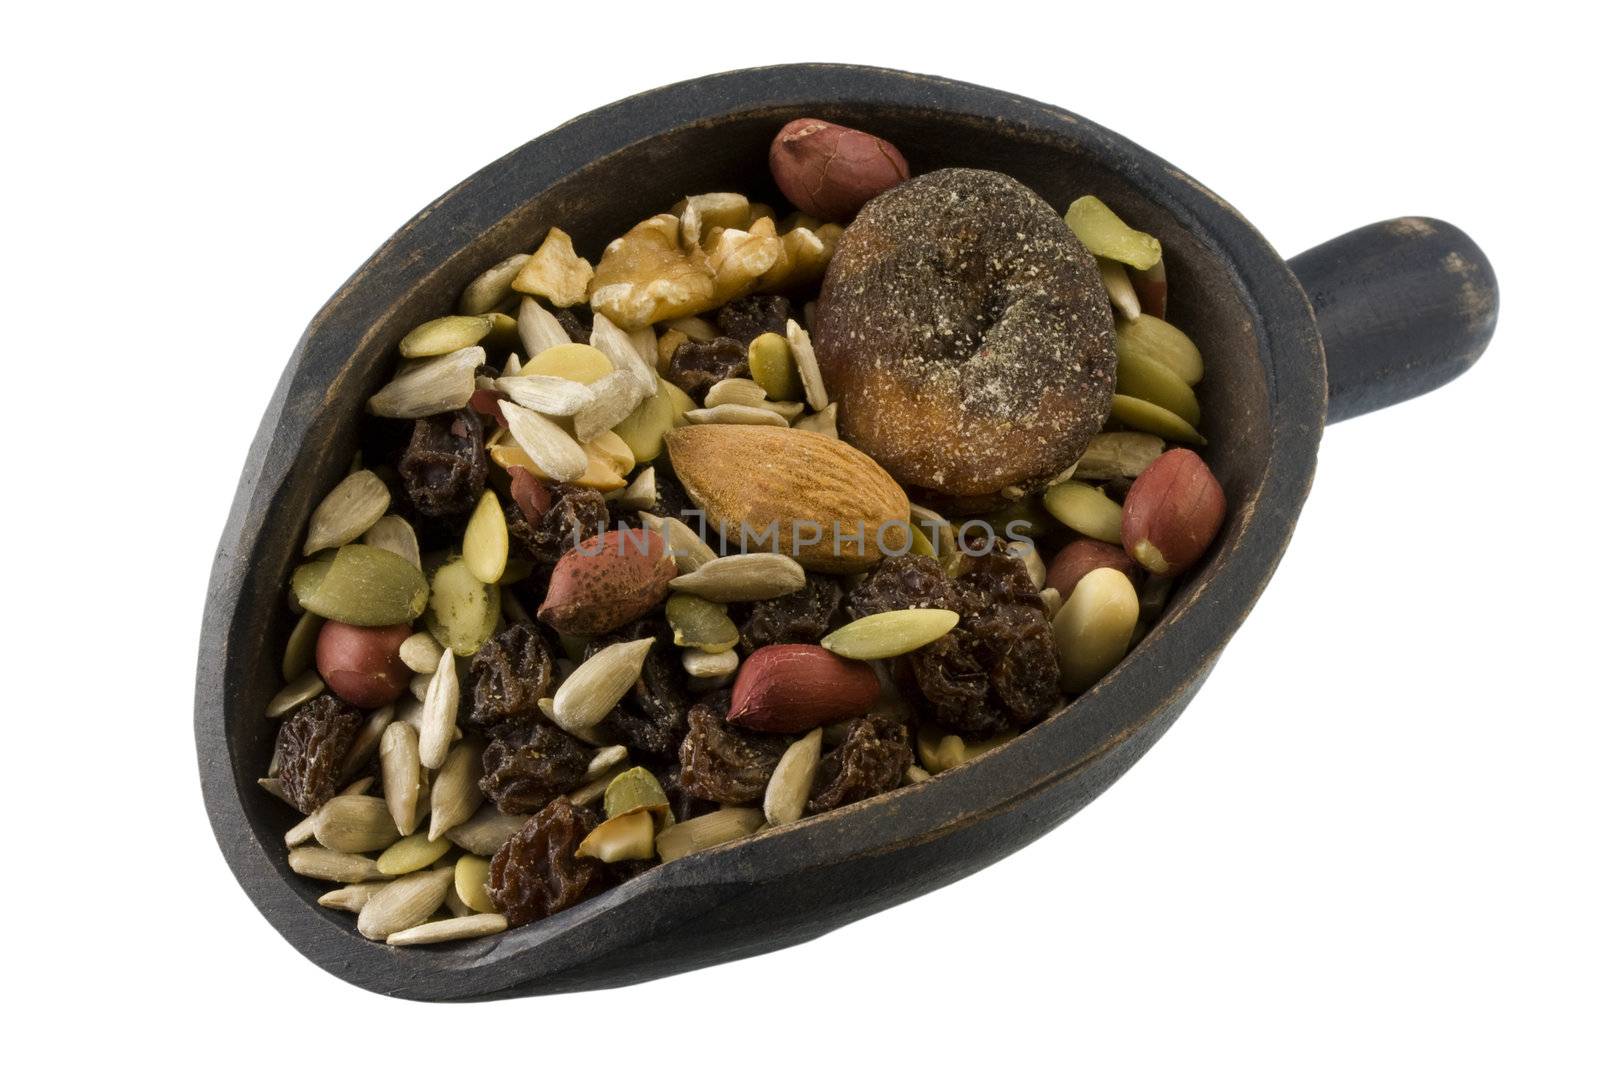 scoop of trail mix with nuts, seeds and fruits by PixelsAway